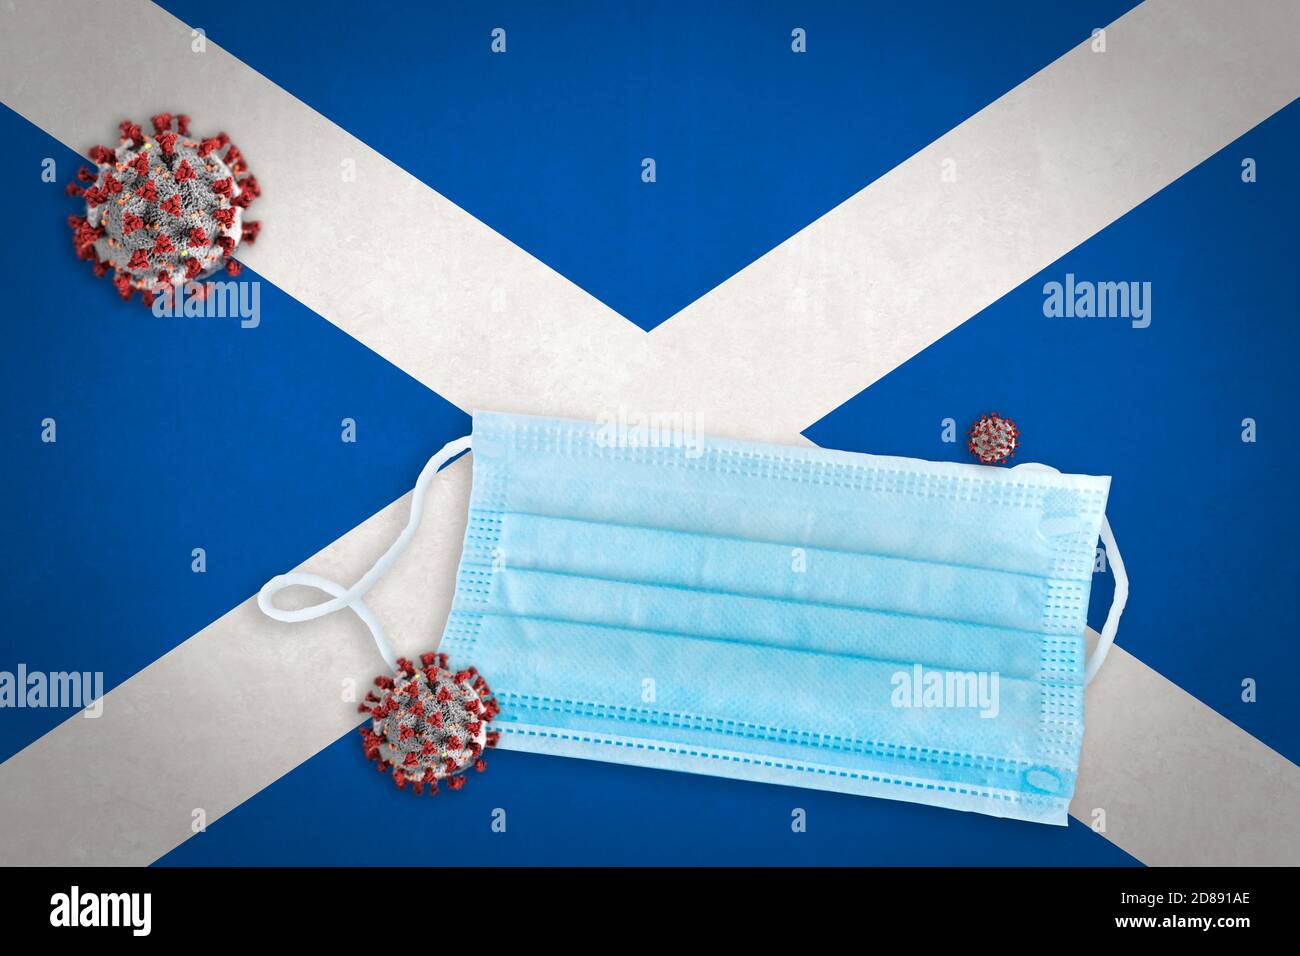 Concept illustration of  surgical face mask over flag of Scotland and Coronavirus or Covid-19 particles in front. Stock Photo